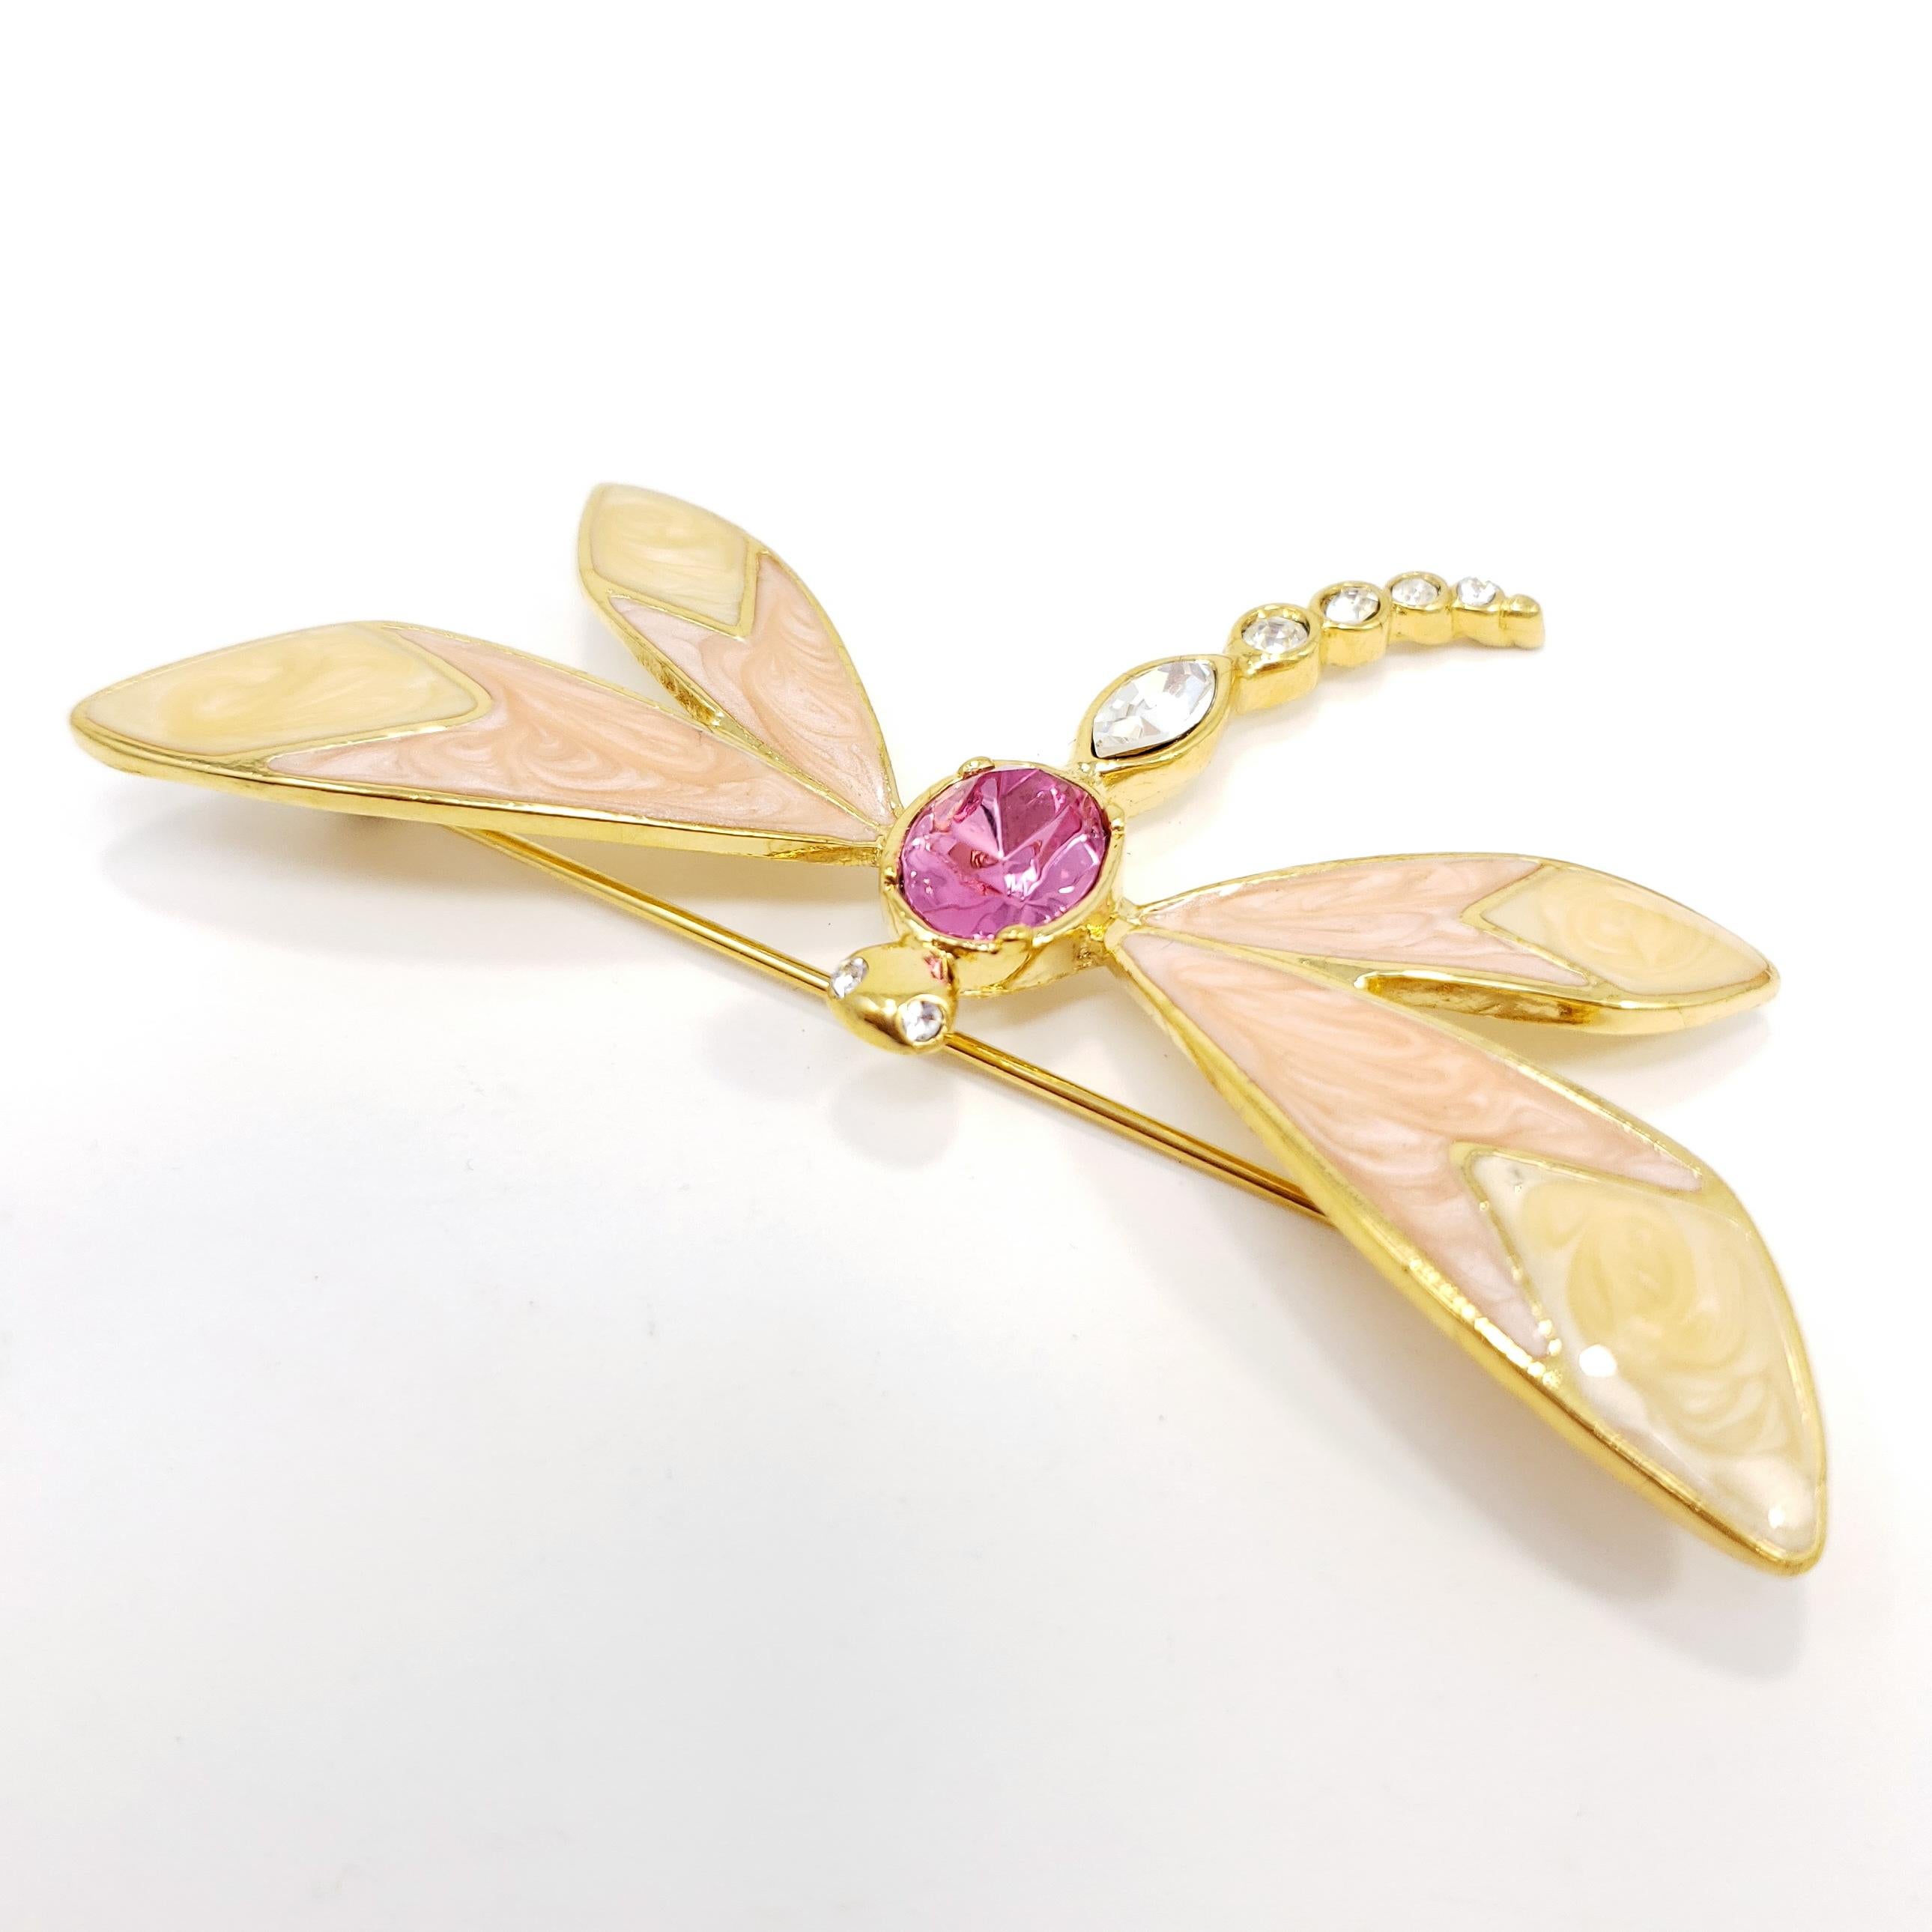 Golden butterfly brooch with marbled, coral-colored inlays and sparkling Swarovski crystals. By Kenneth Jay Lane for Avon.

Gold-plated. Circa 1980s.

Marks / hallmarks: KJL for Avon